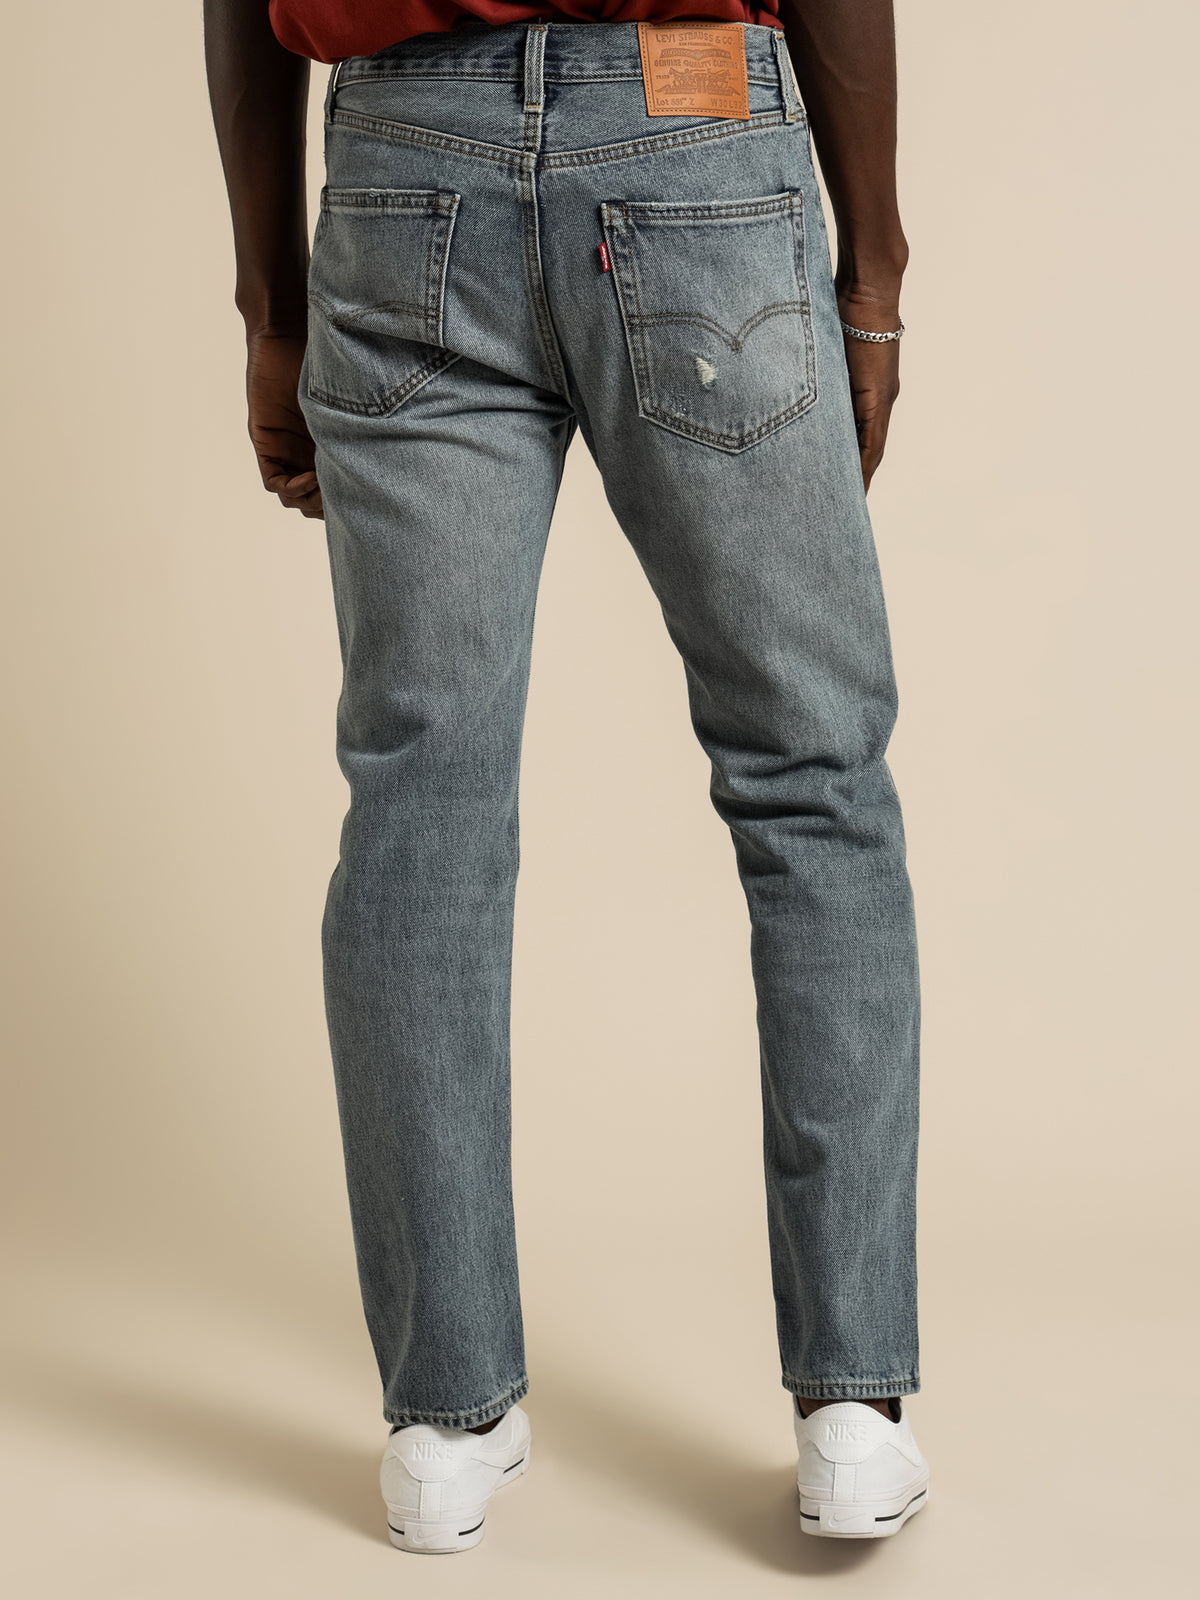 551Z Authentic Straight Leg Jeans in Hula Hooper